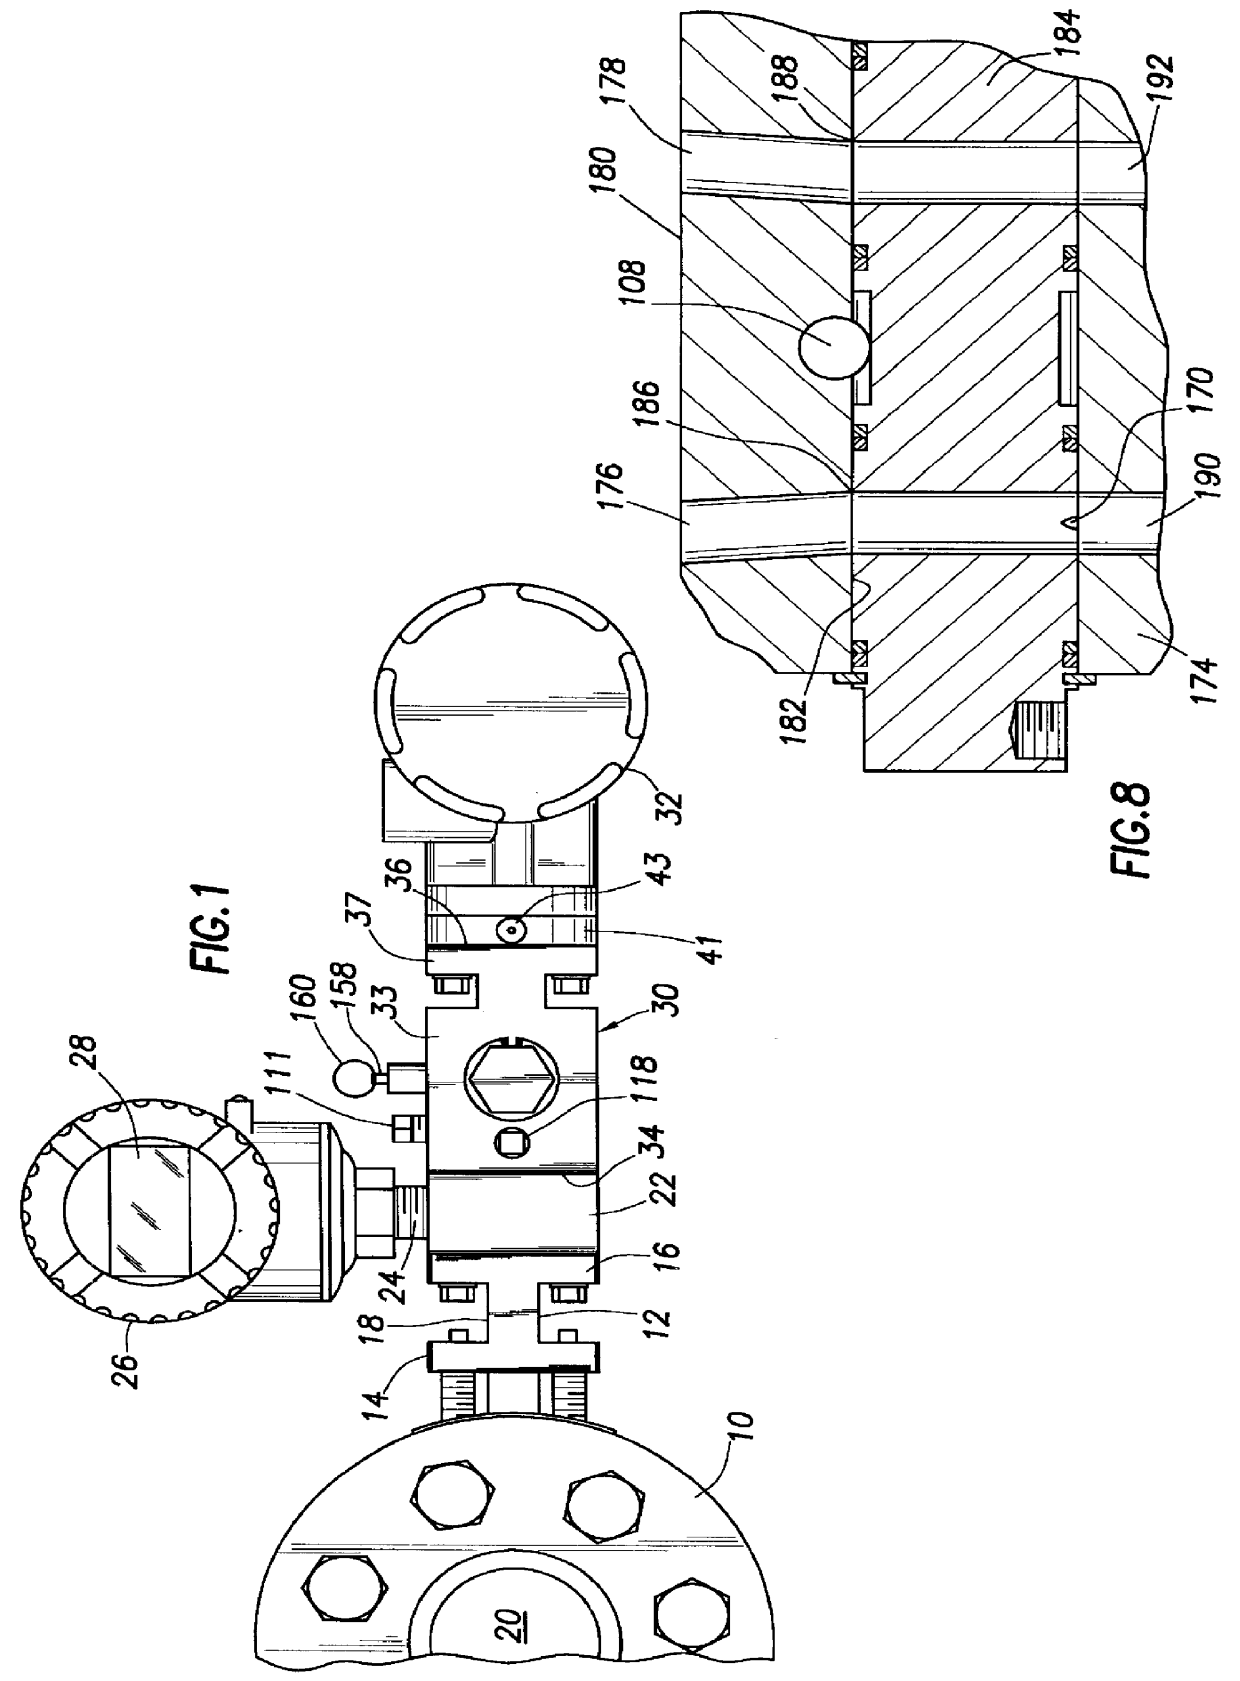 Differential pressure instrument support manifold having rotary mode selection system